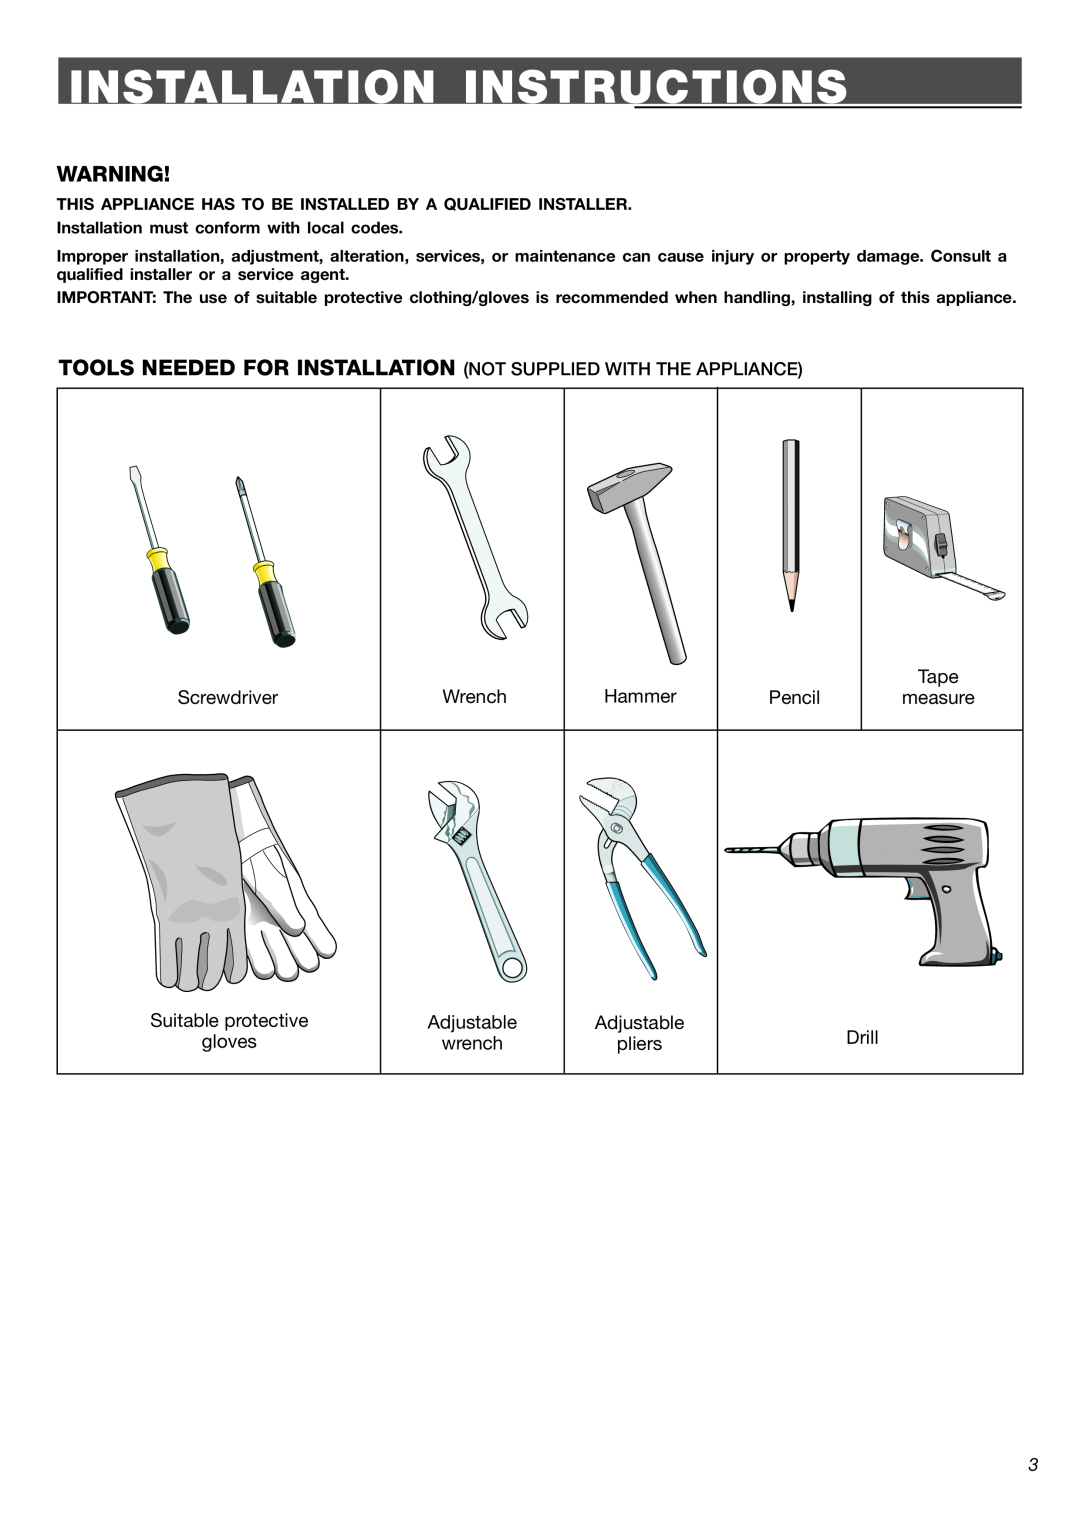 Verona VEFSEE 244 P Installation Instructions, Screwdriver, Wrench, Hammer, Pencil, Tape measure, Adjustable wrench, Drill 